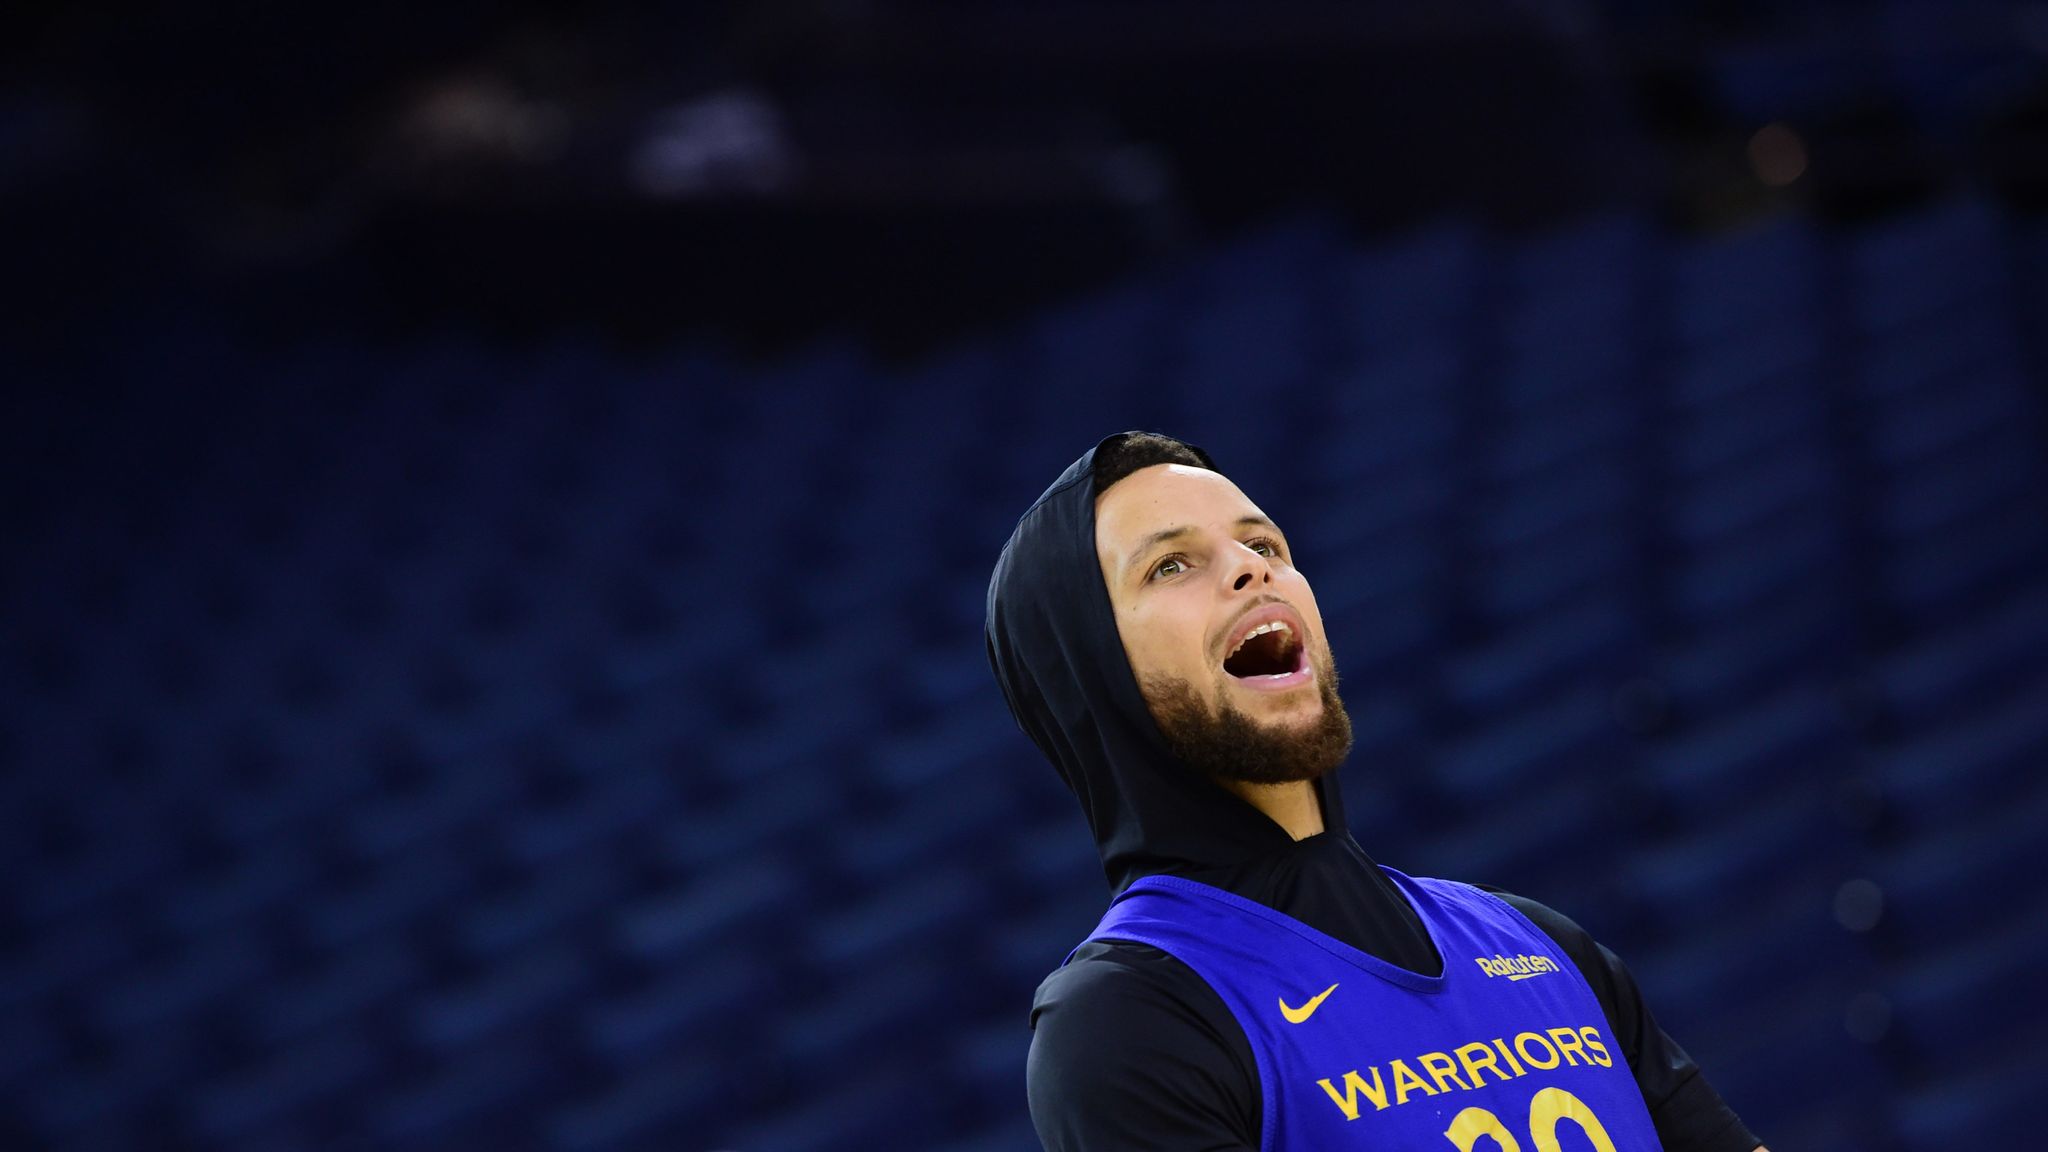 Stephen Curry Jersey Retirement: The Chef to Receive A Massive